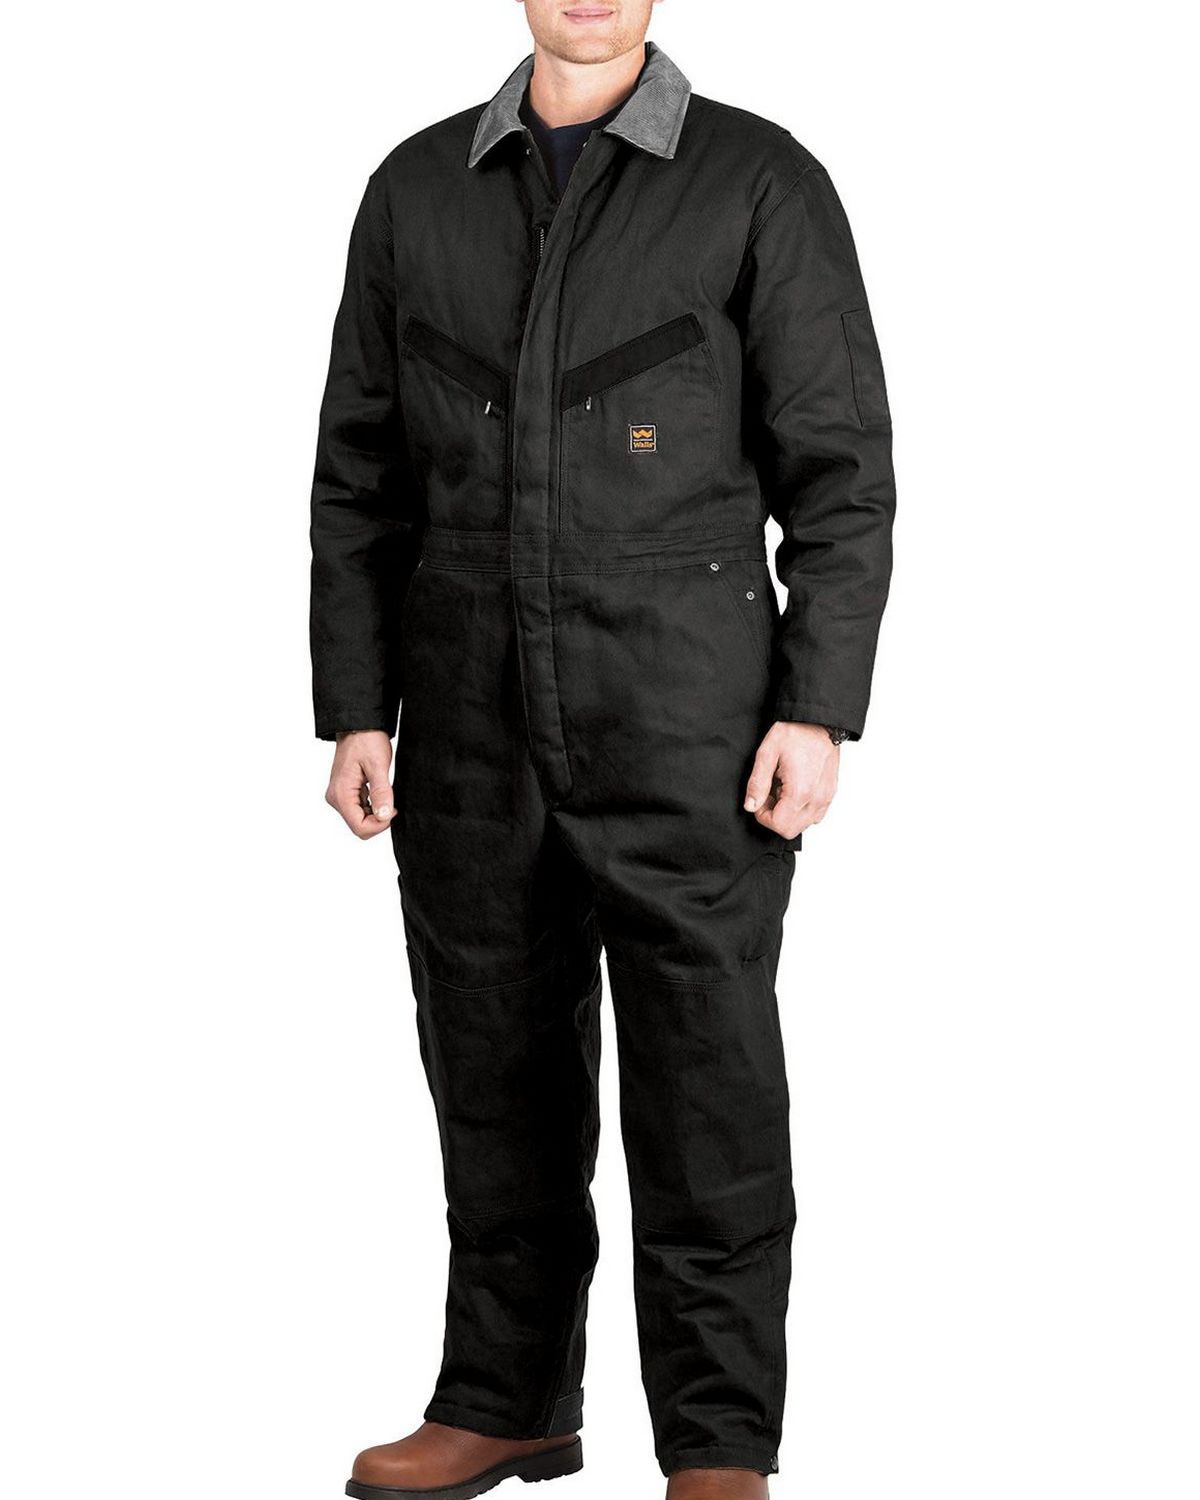 Buy Walls Outdoor Coveralls and Overalls for Men and Women